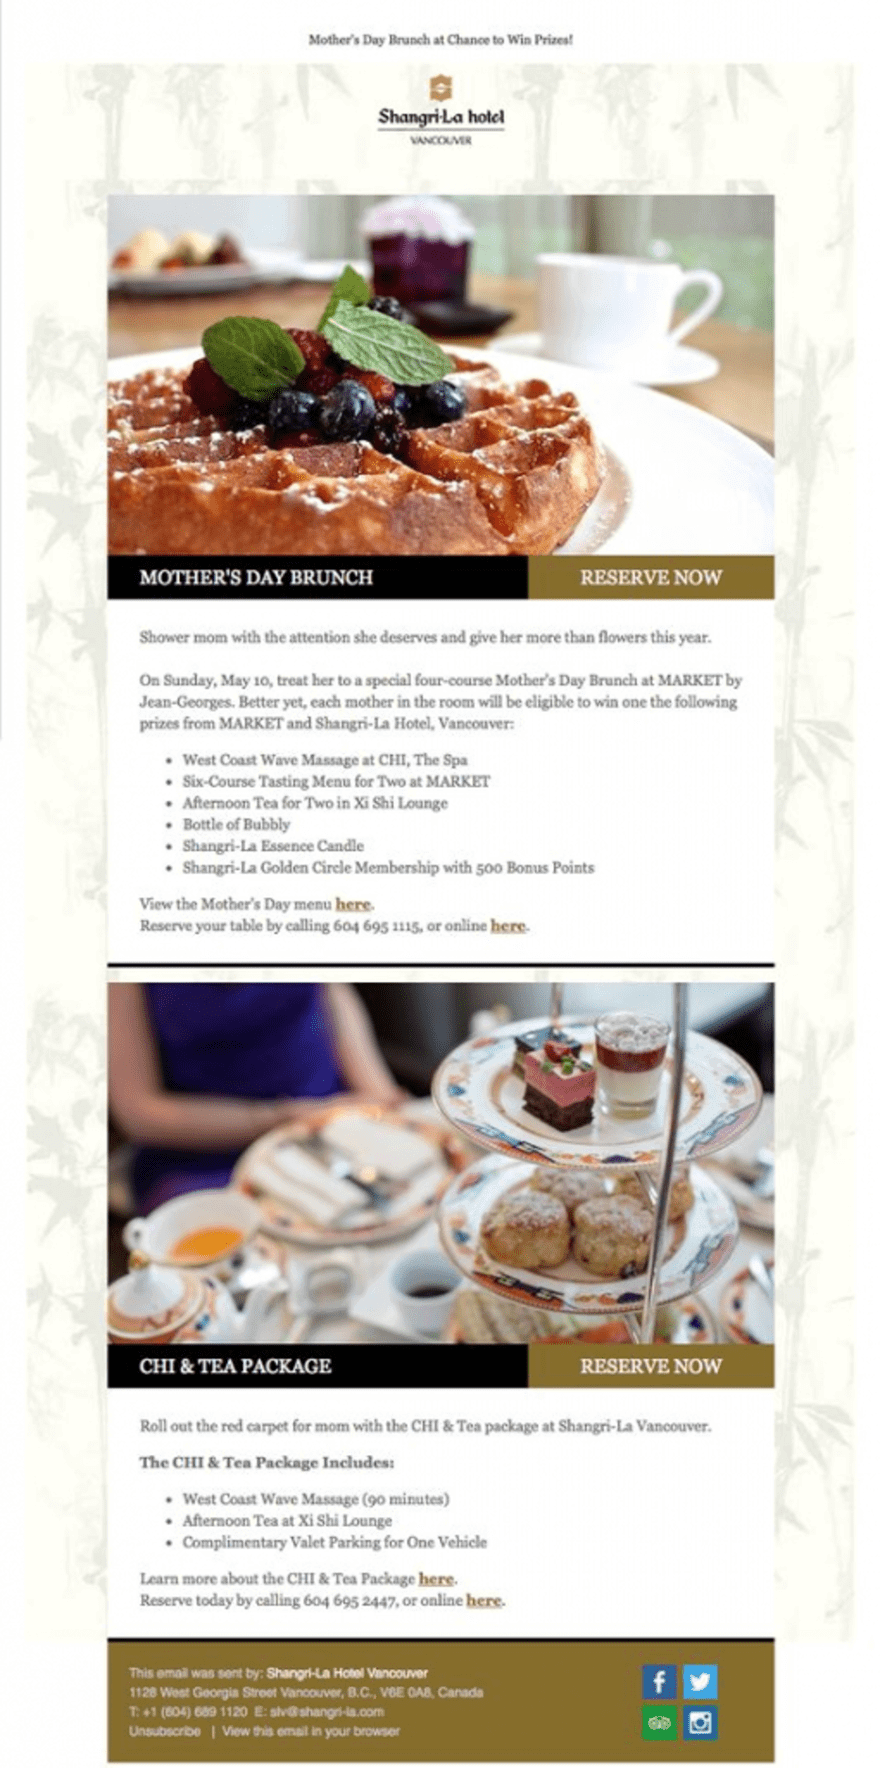 Promotional email from Shangri-La Hotel Vancouver offering a special Mother's Day Brunch and a CHI & Tea package with reservation details and contact information.